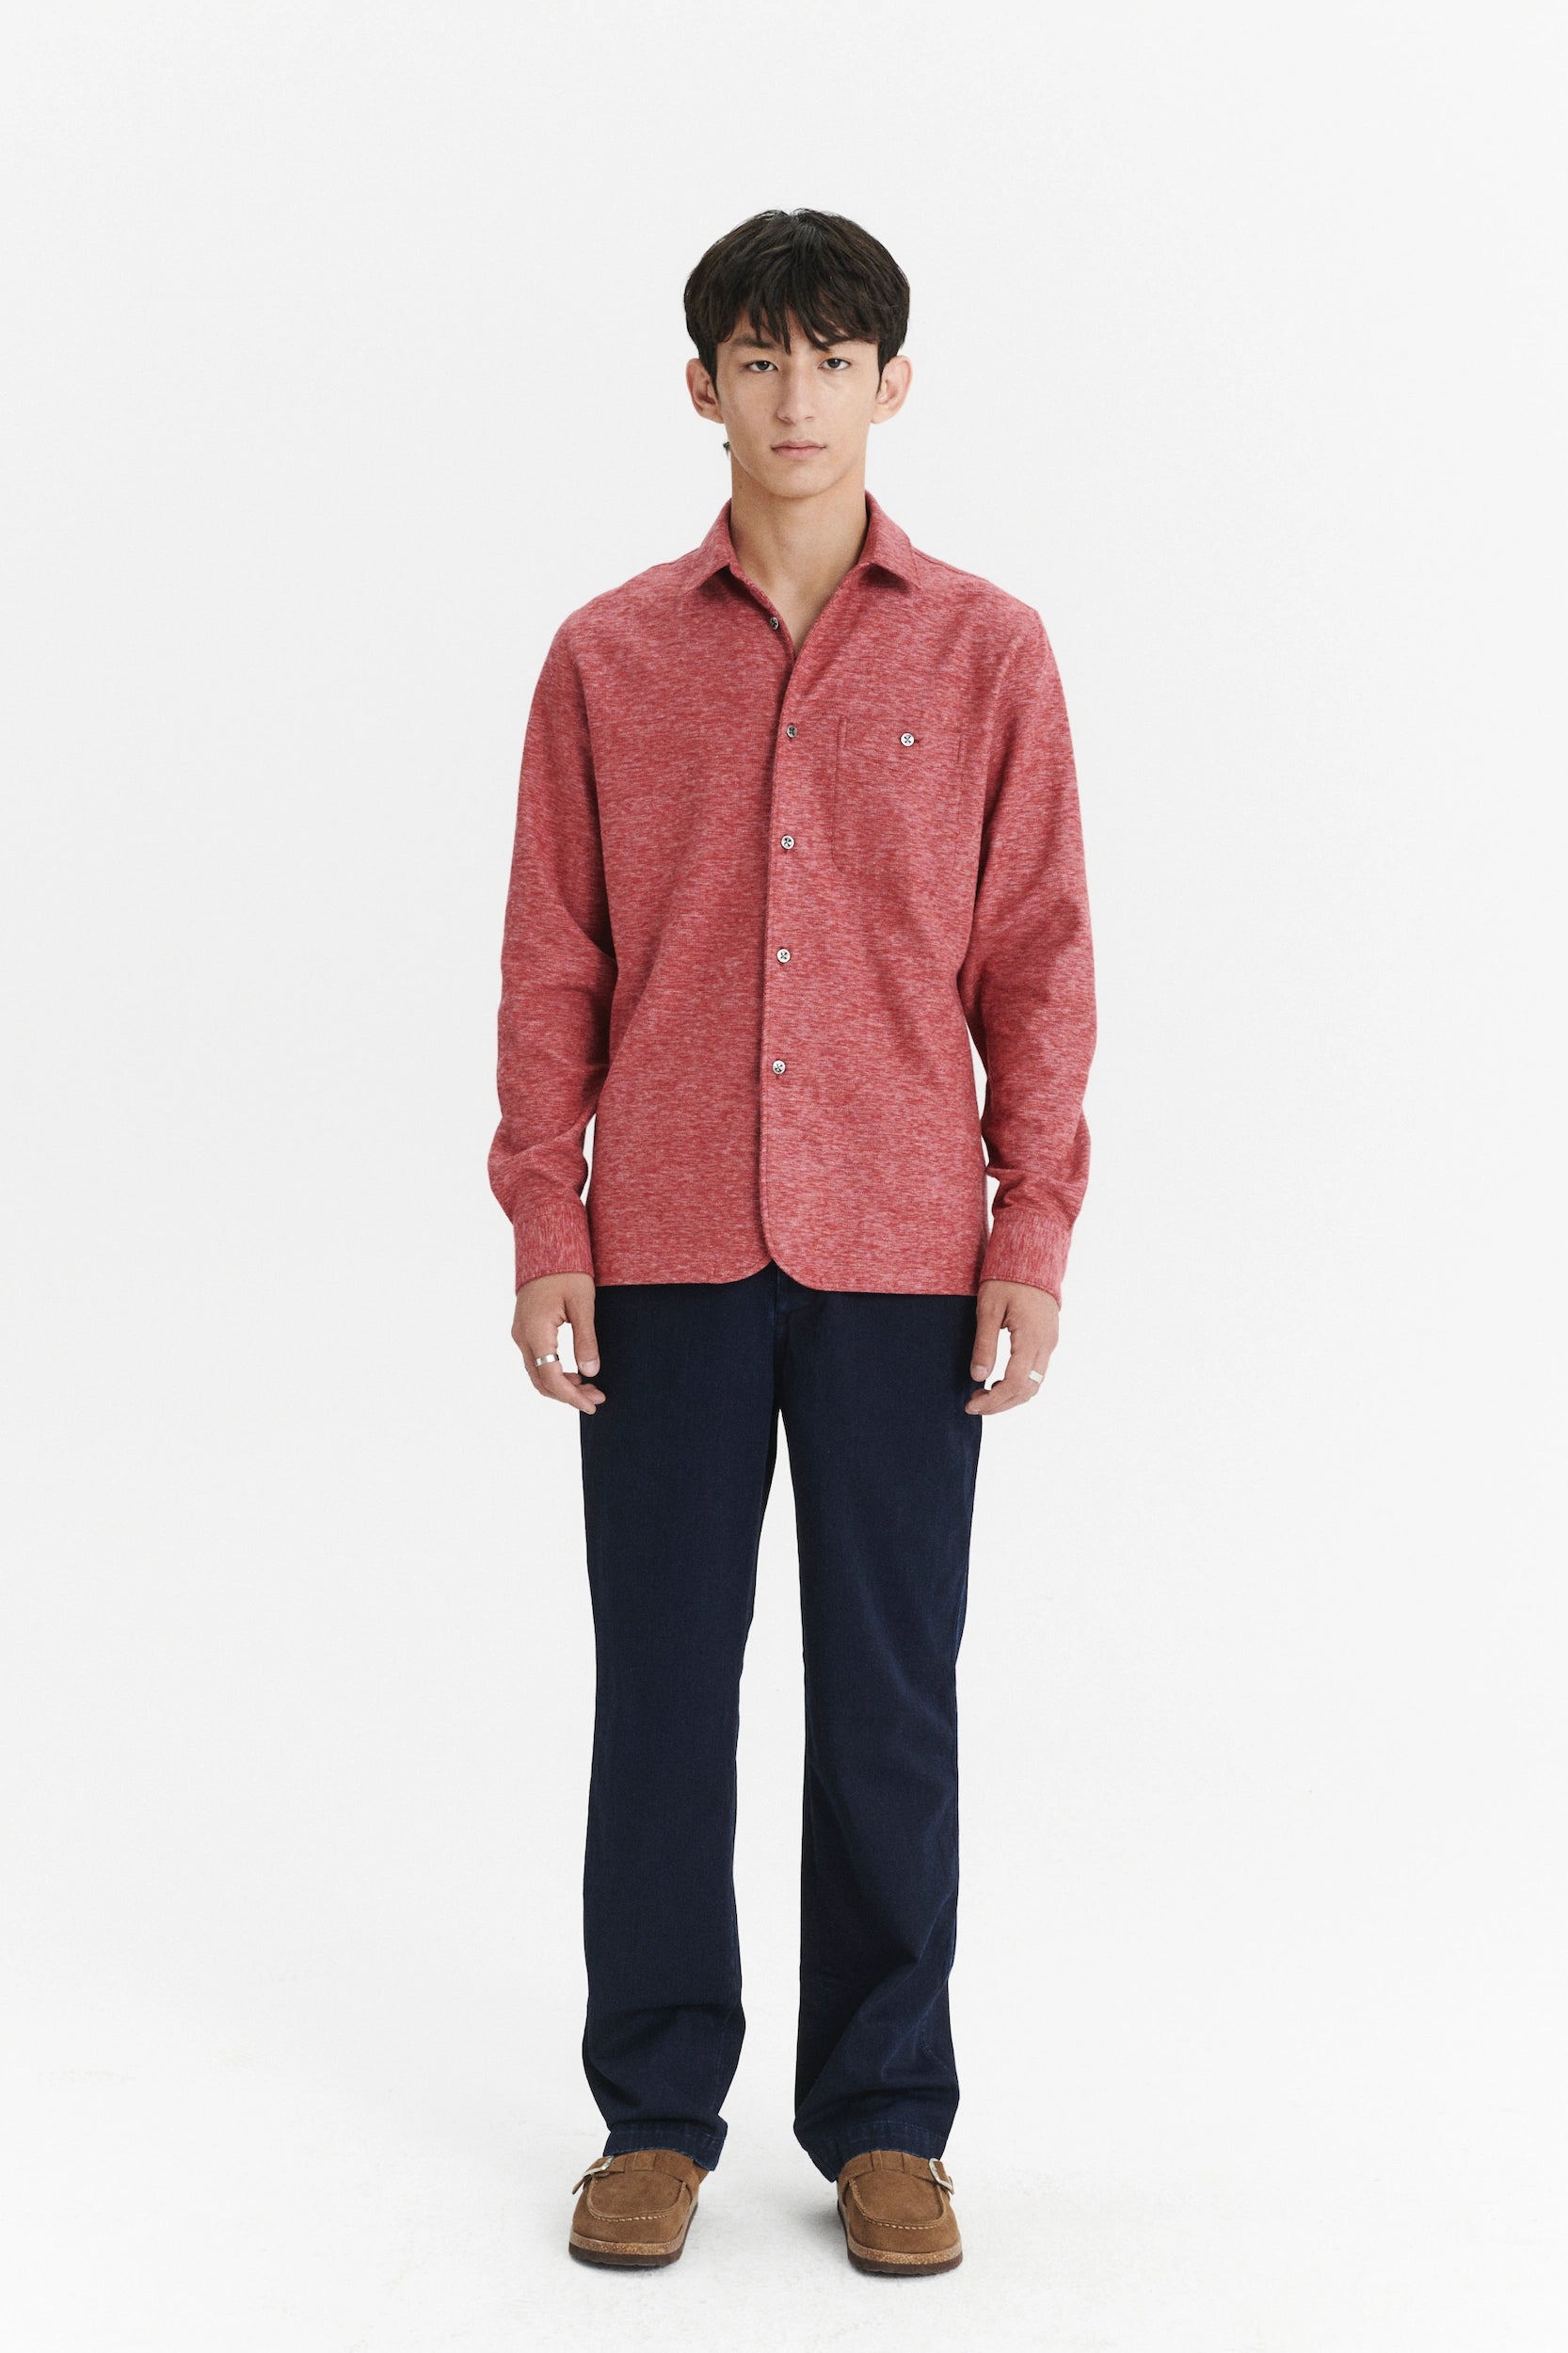 strong-shirt-in-the-finest-melange-red-italian-cotton-flannel-by-albini